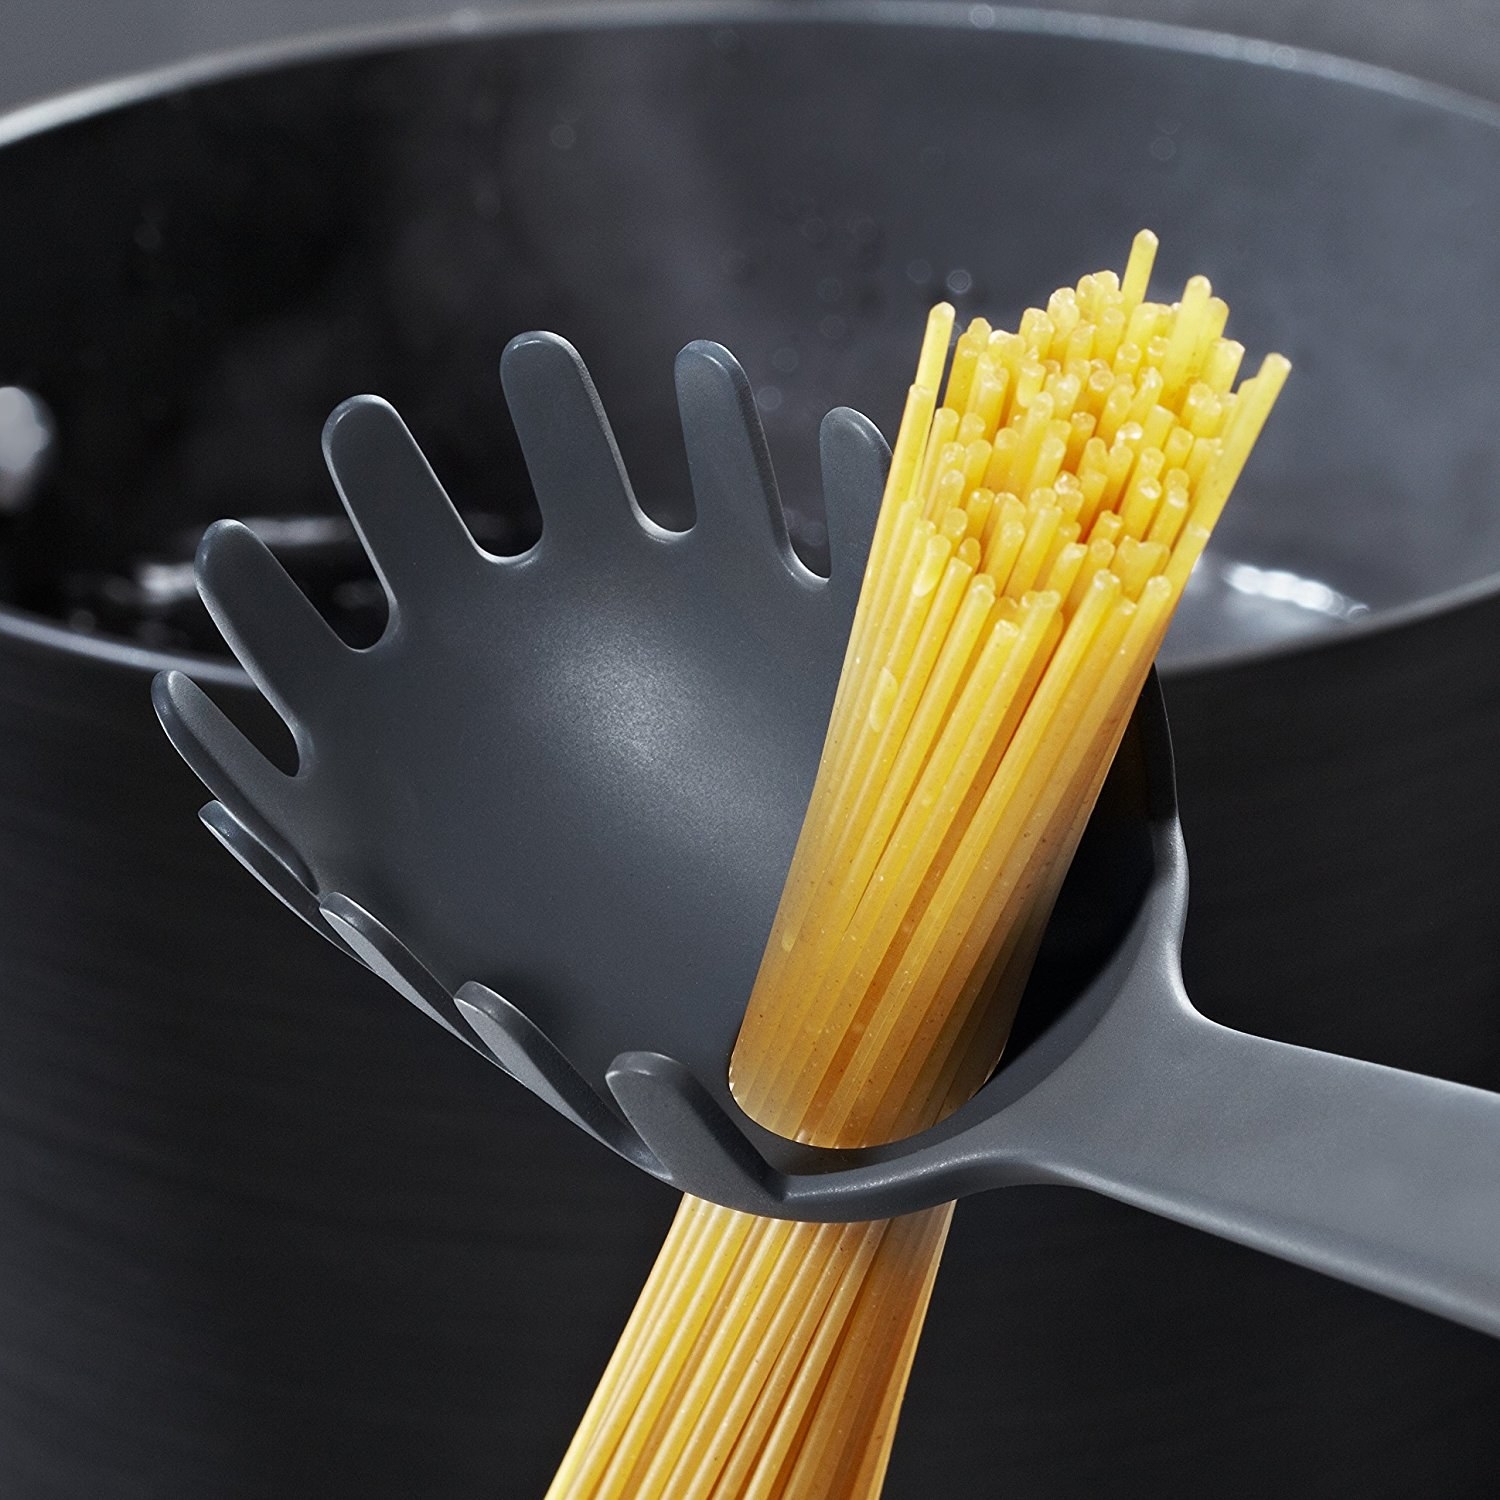 Can This 500-Year-Old Gadget Make Delicious Pasta? 